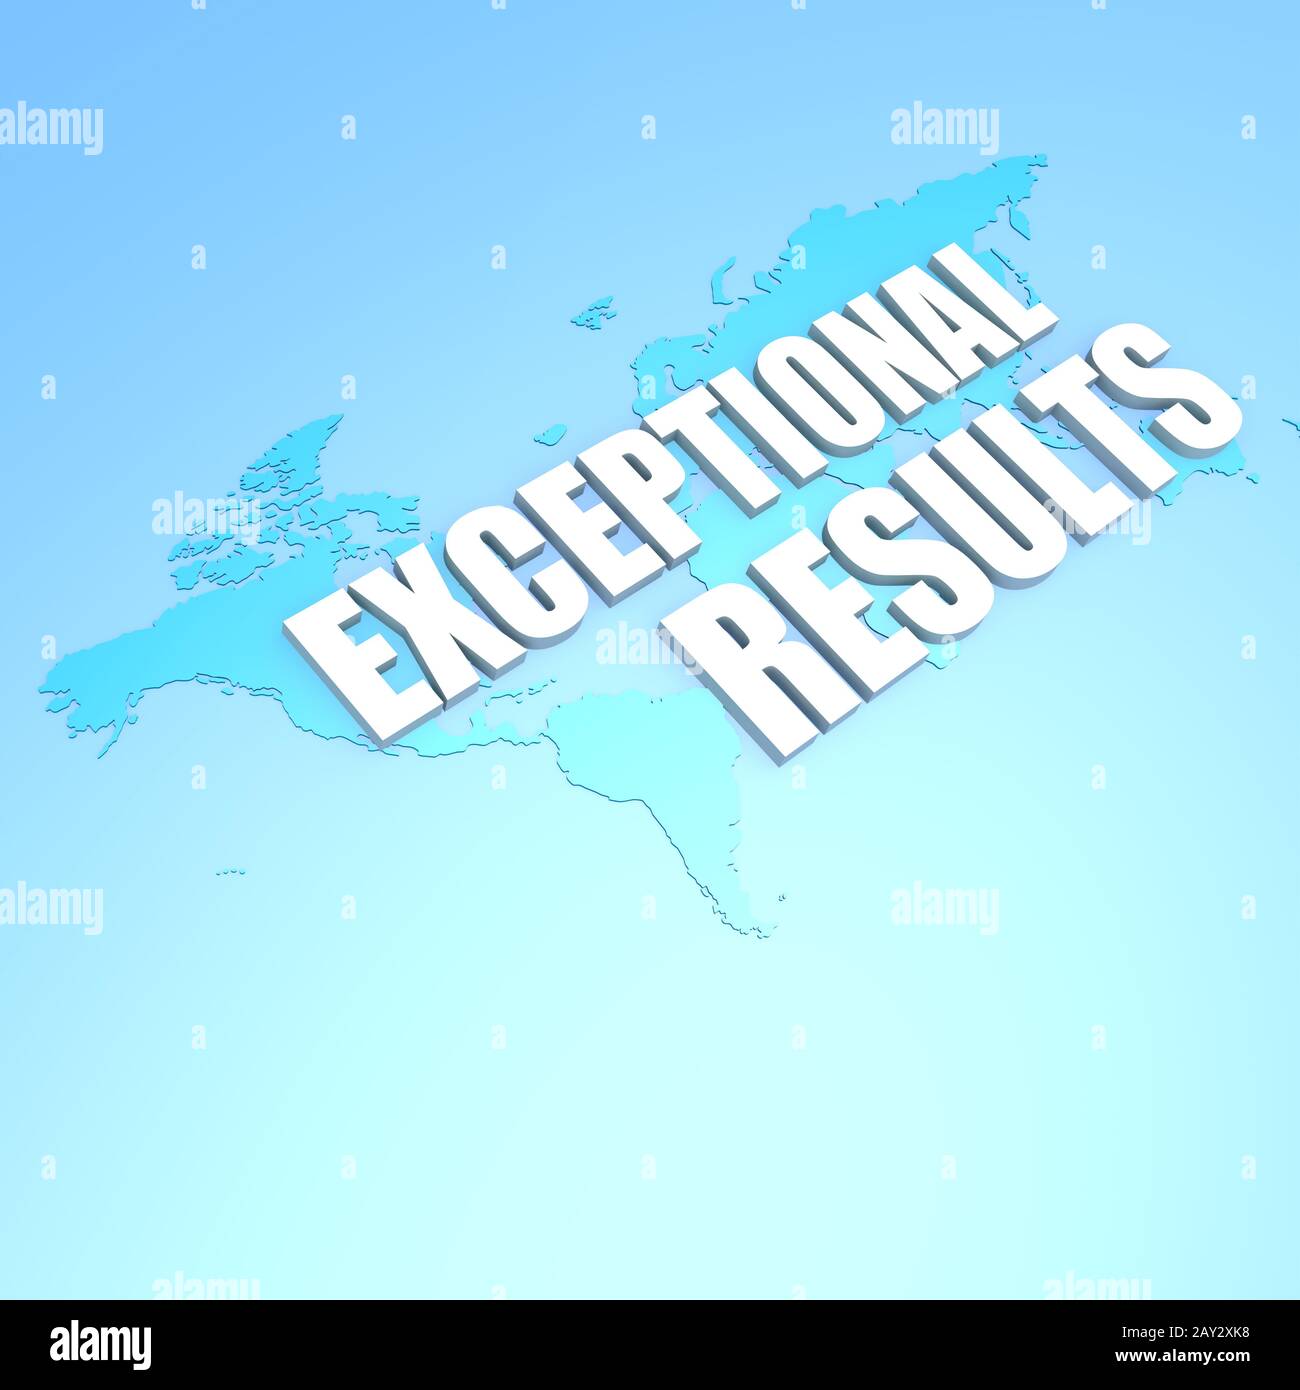 Exceptional results world map Stock Photo